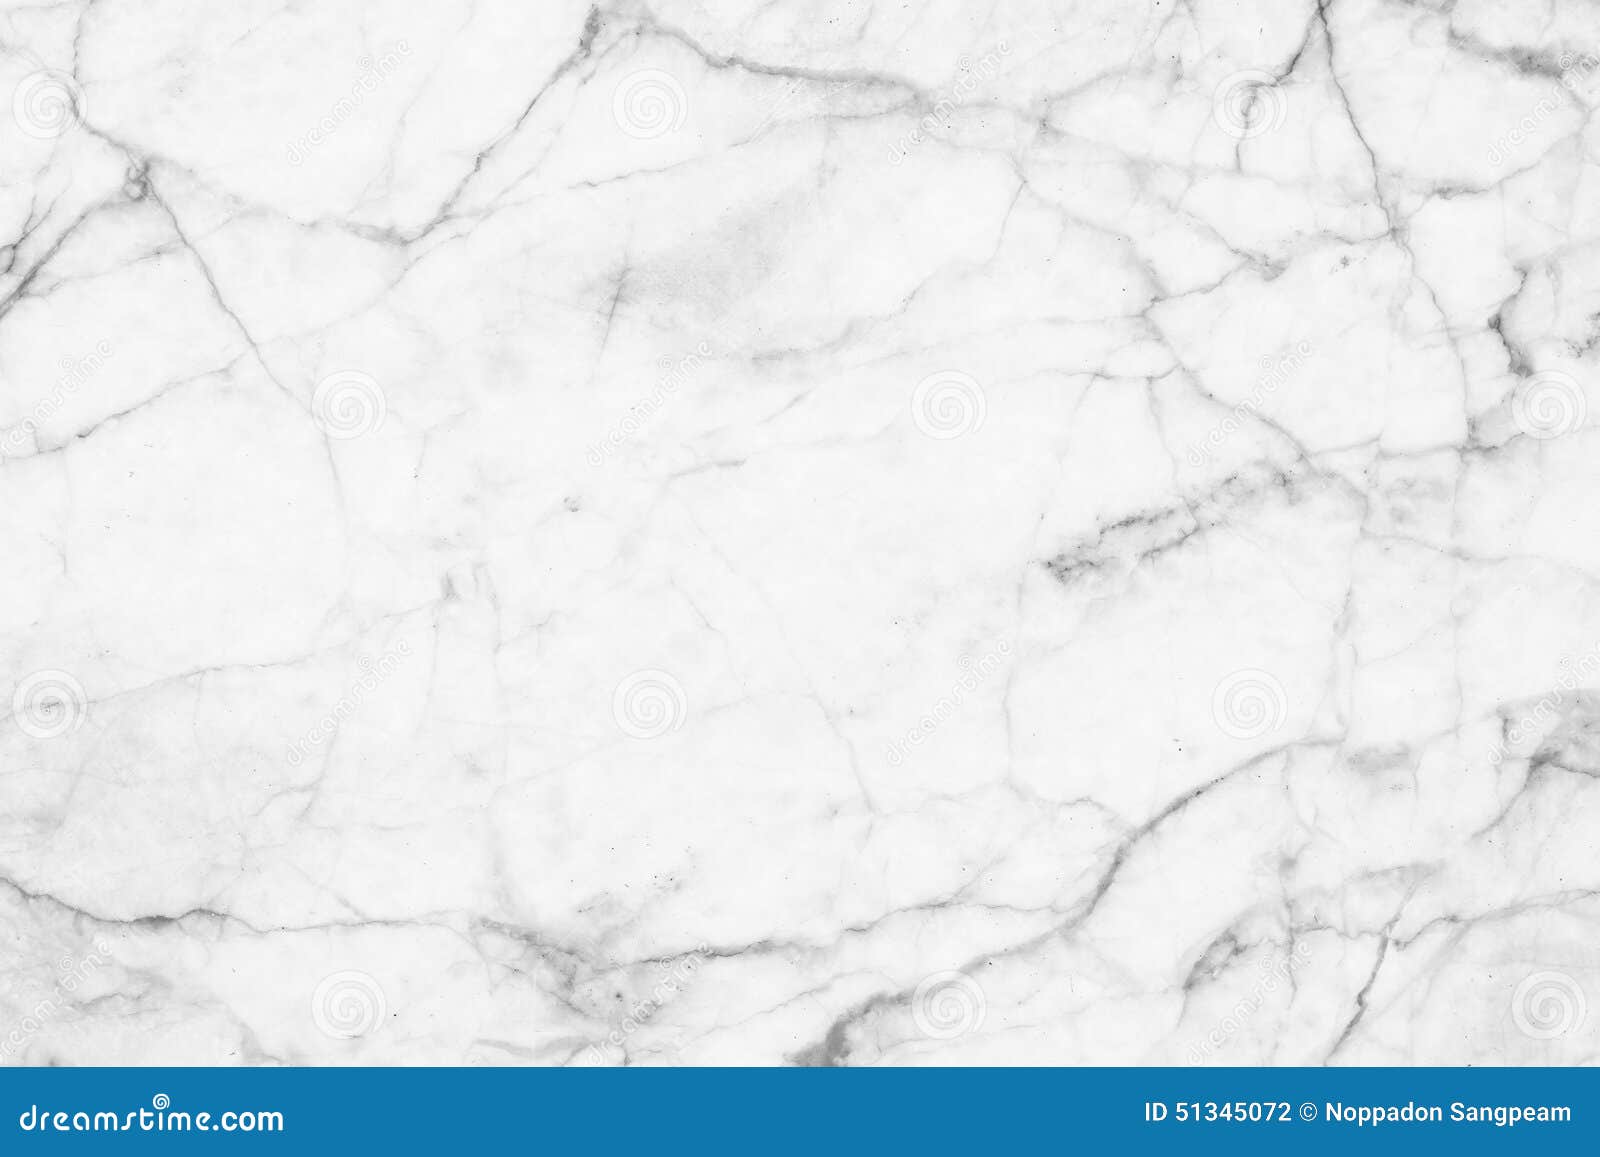 abstract black and white marble patterned (natural patterns) texture background.